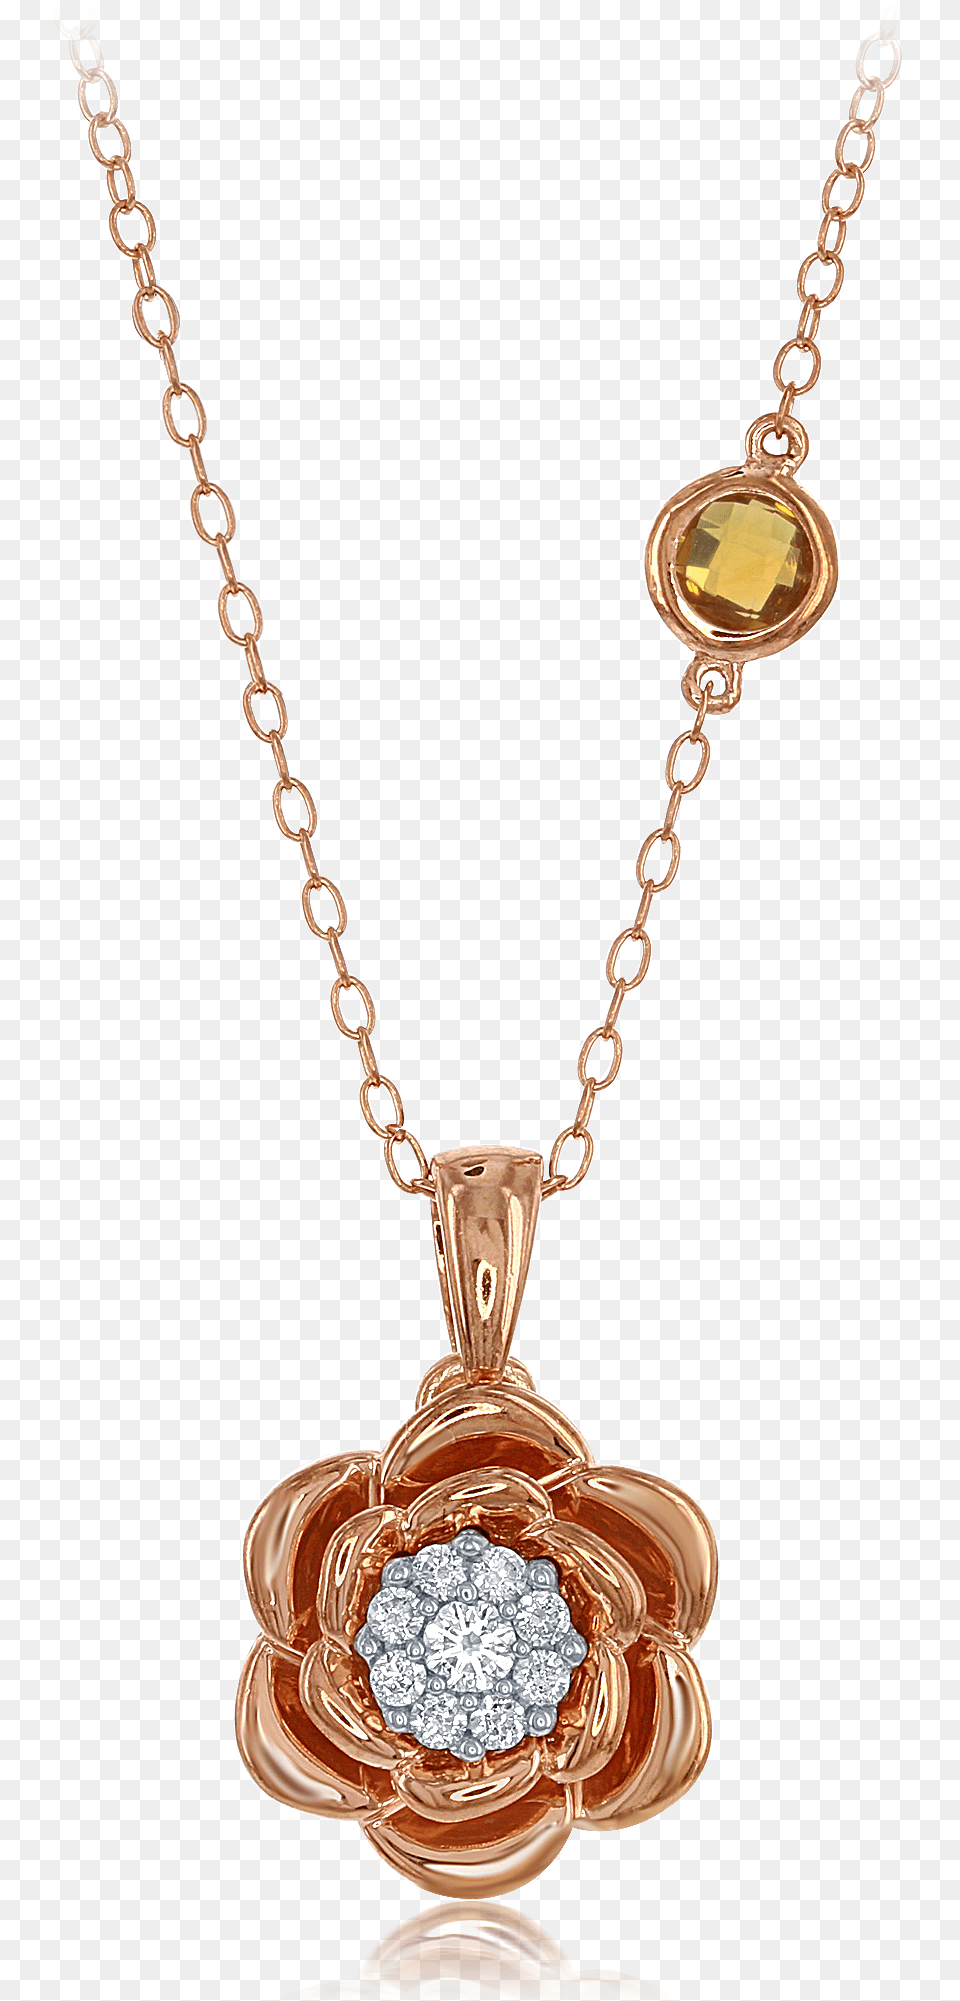 Enchanted Disney S Belle 14k Rose And White Gold Diamond Colar Bela E A Fera, Accessories, Jewelry, Necklace, Pendant Png Image